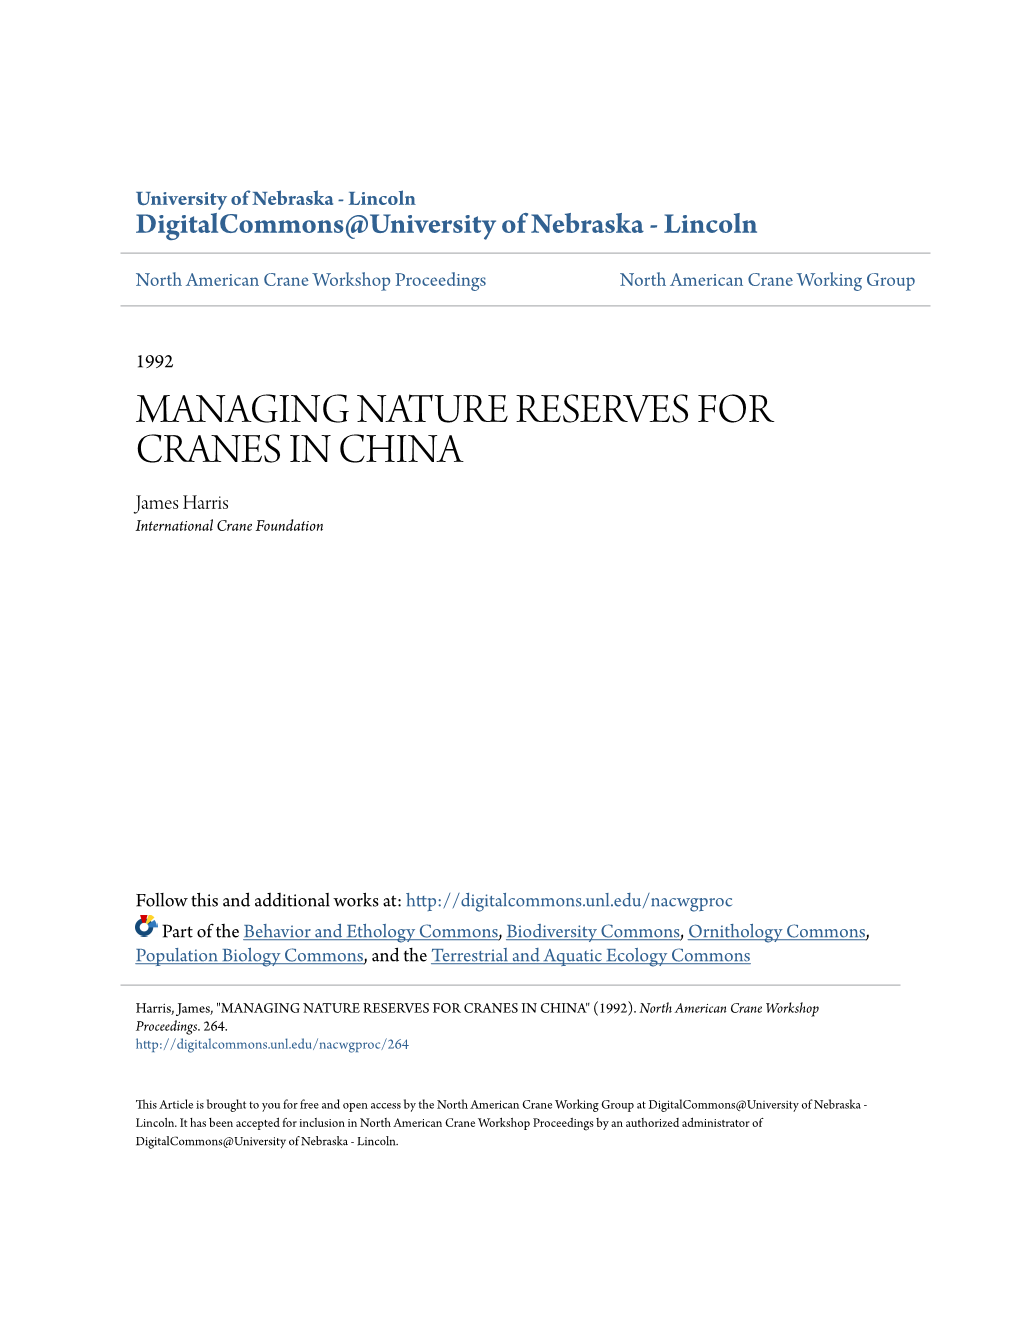 Managing Nature Reserves for Cranes in China" (1992)